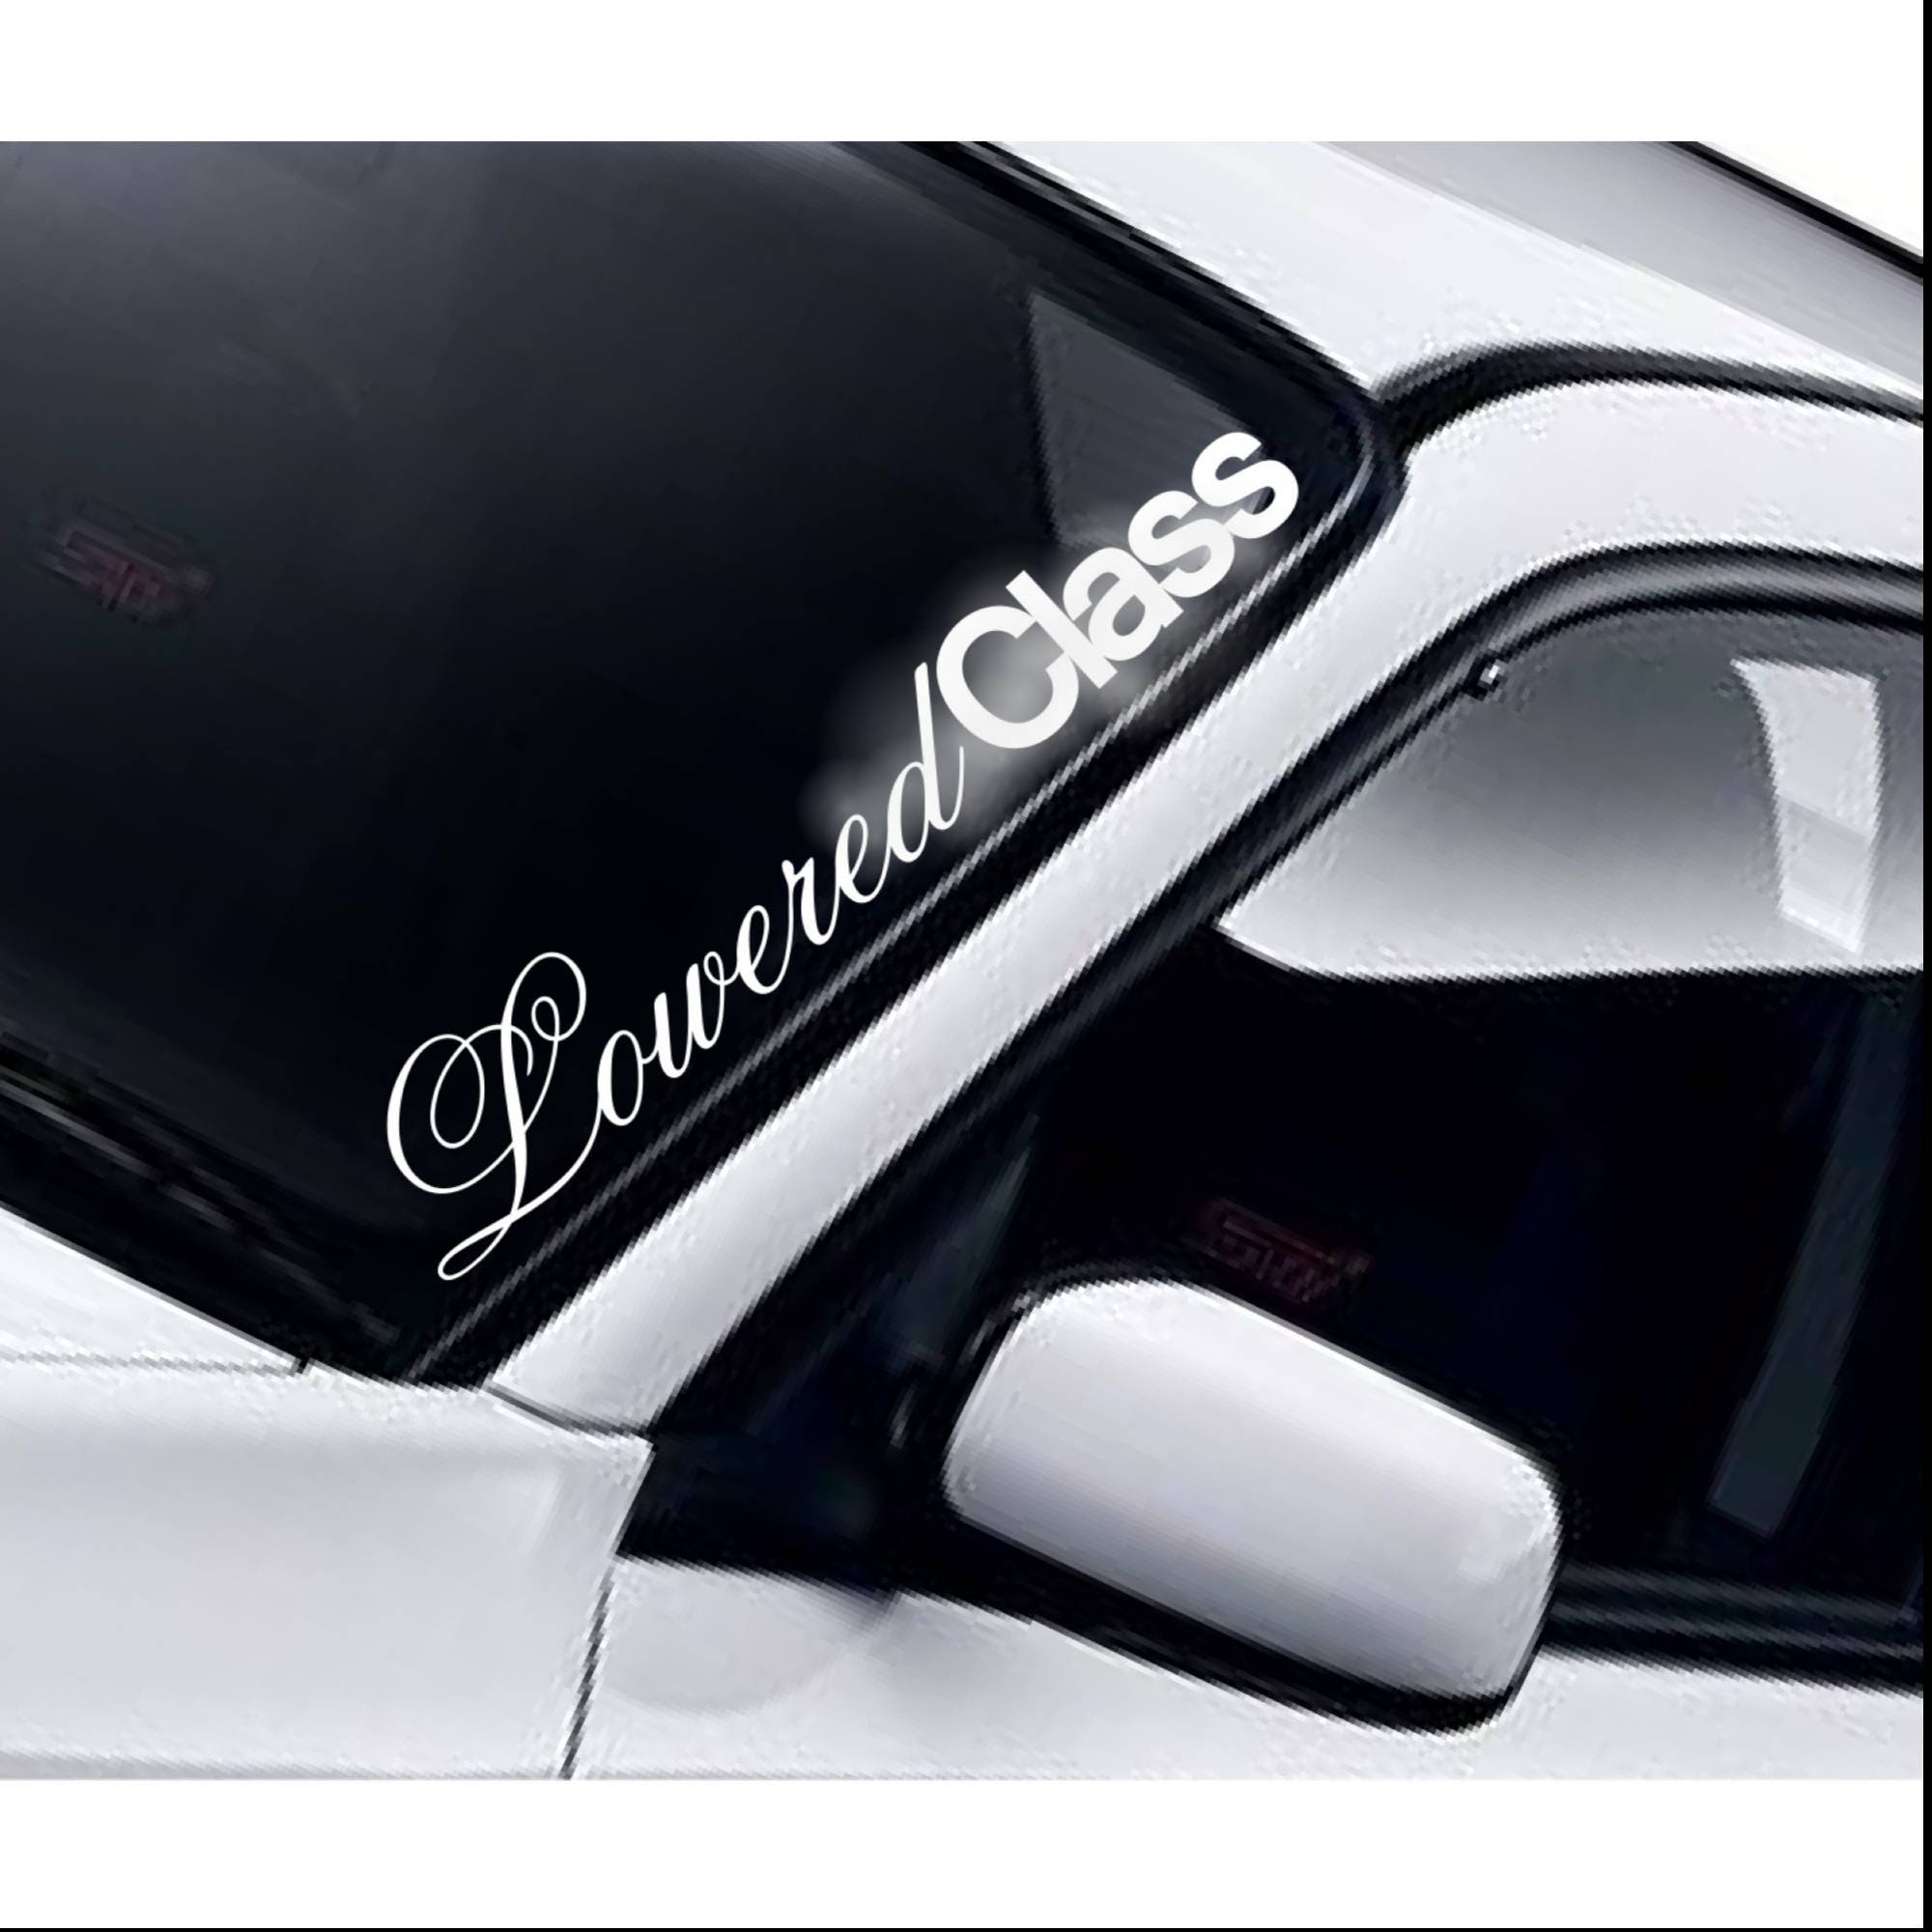 Lowered Class Windscreen Sticker Windshield Banner Funny Low Stance Fitment  Static JDM Drift Car Vinyl Decal -  Norway